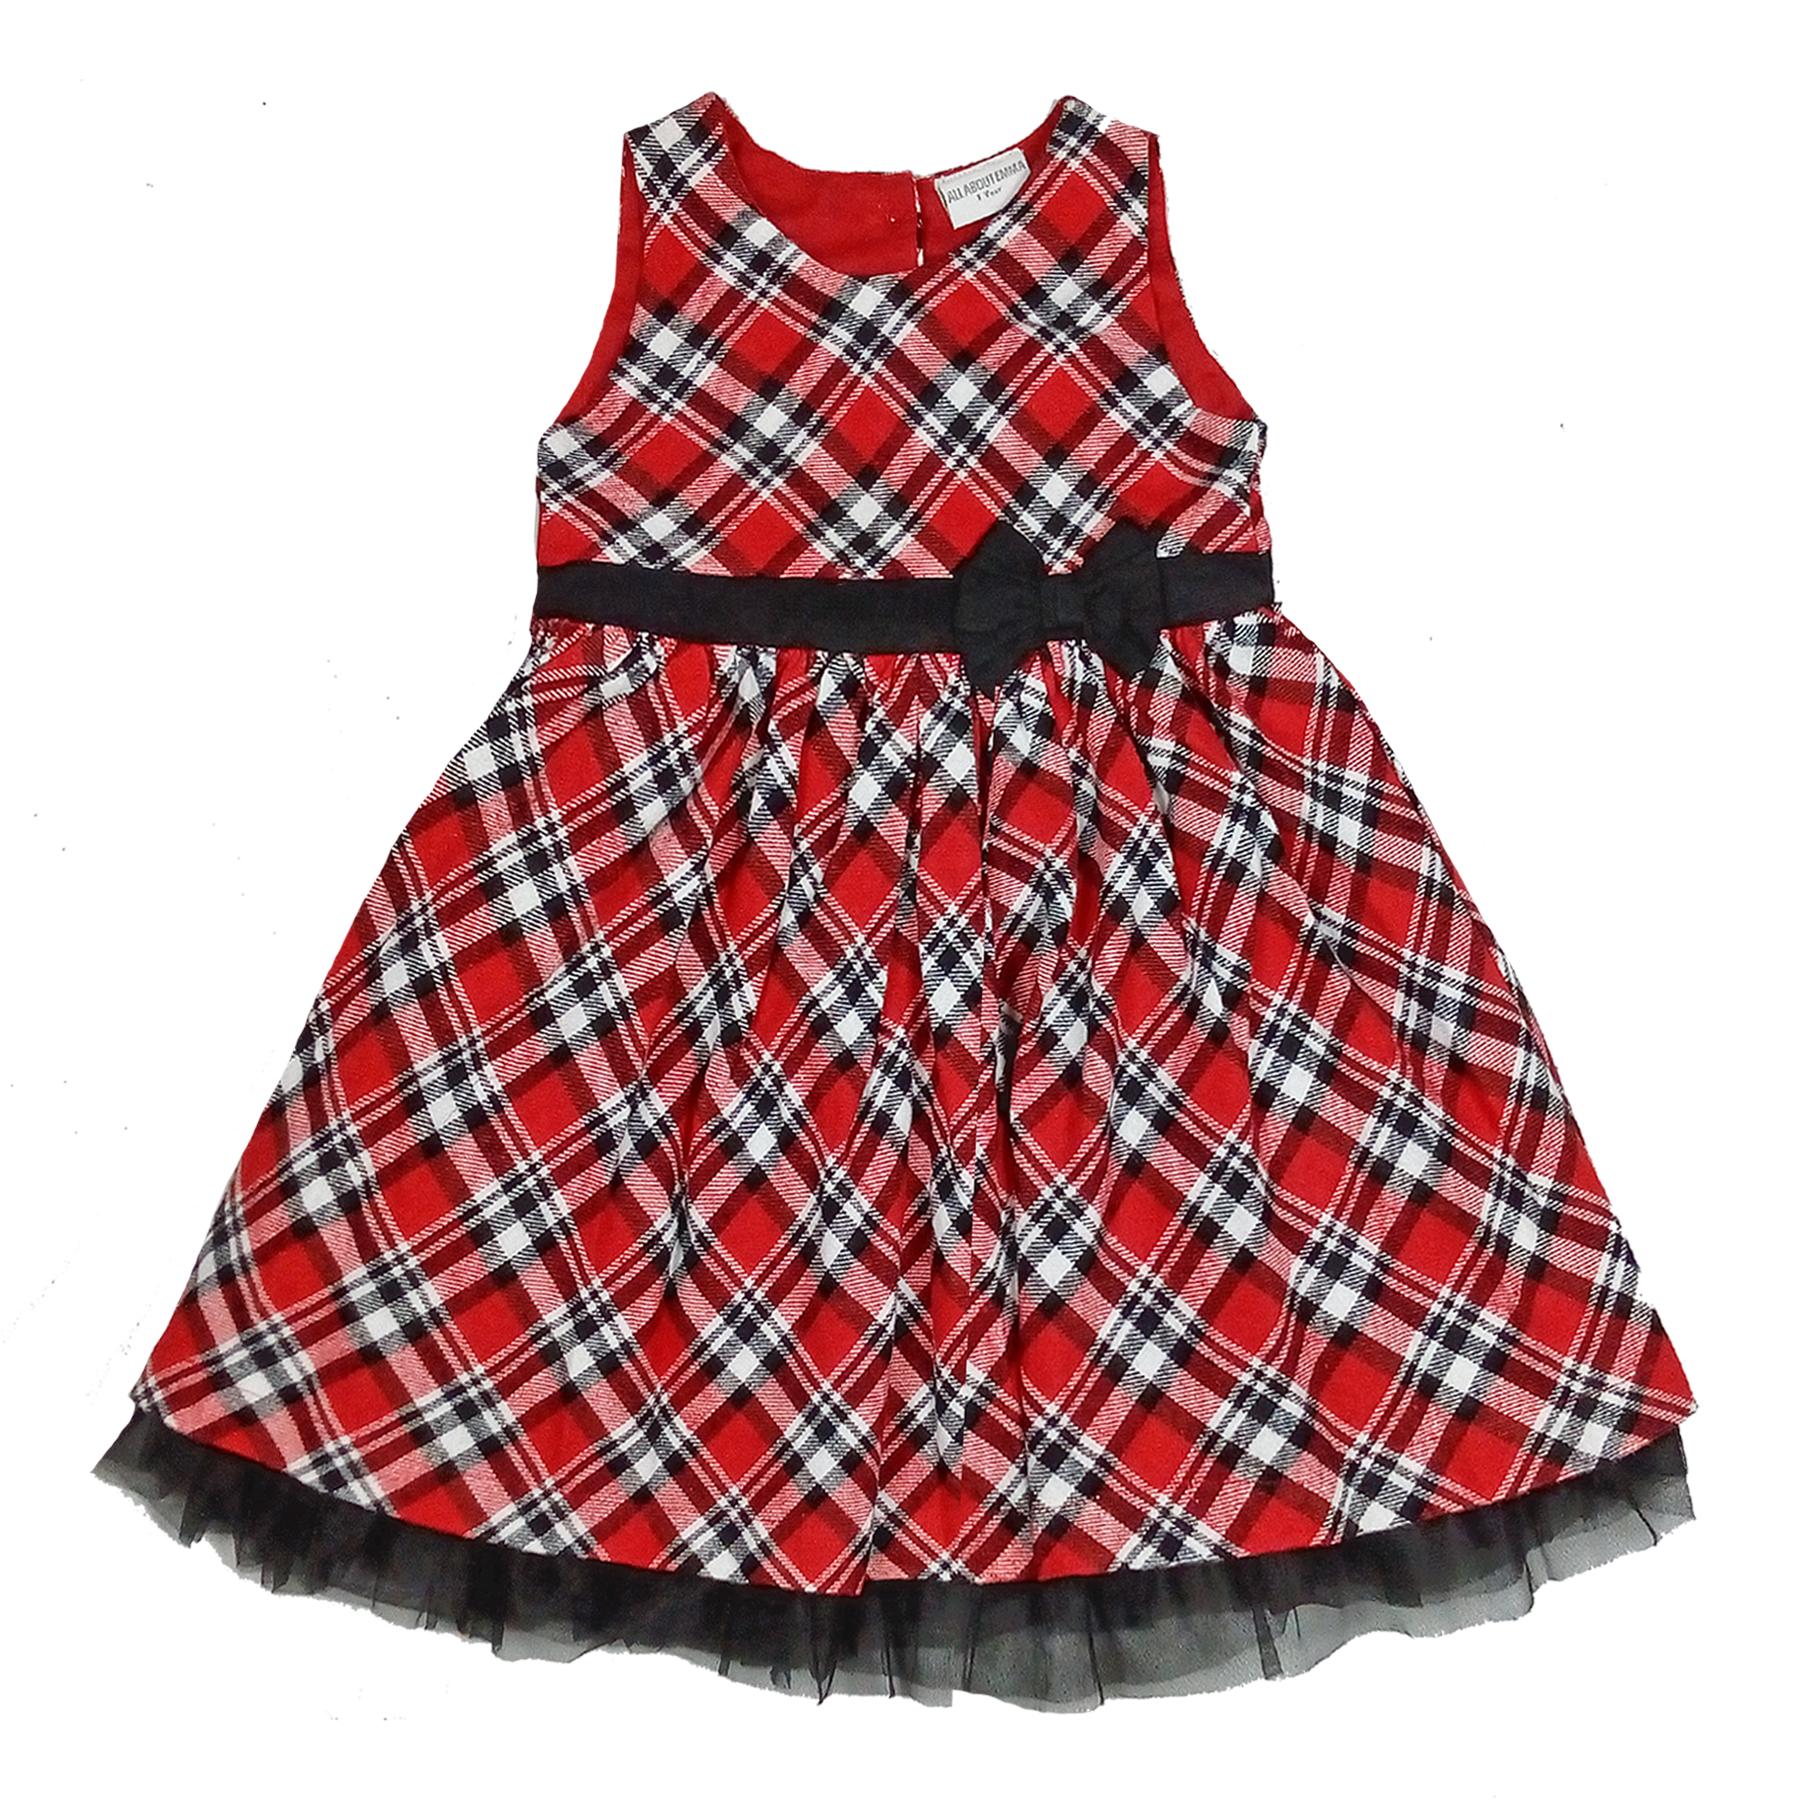 All About Emma Red Check Pinafore Dress